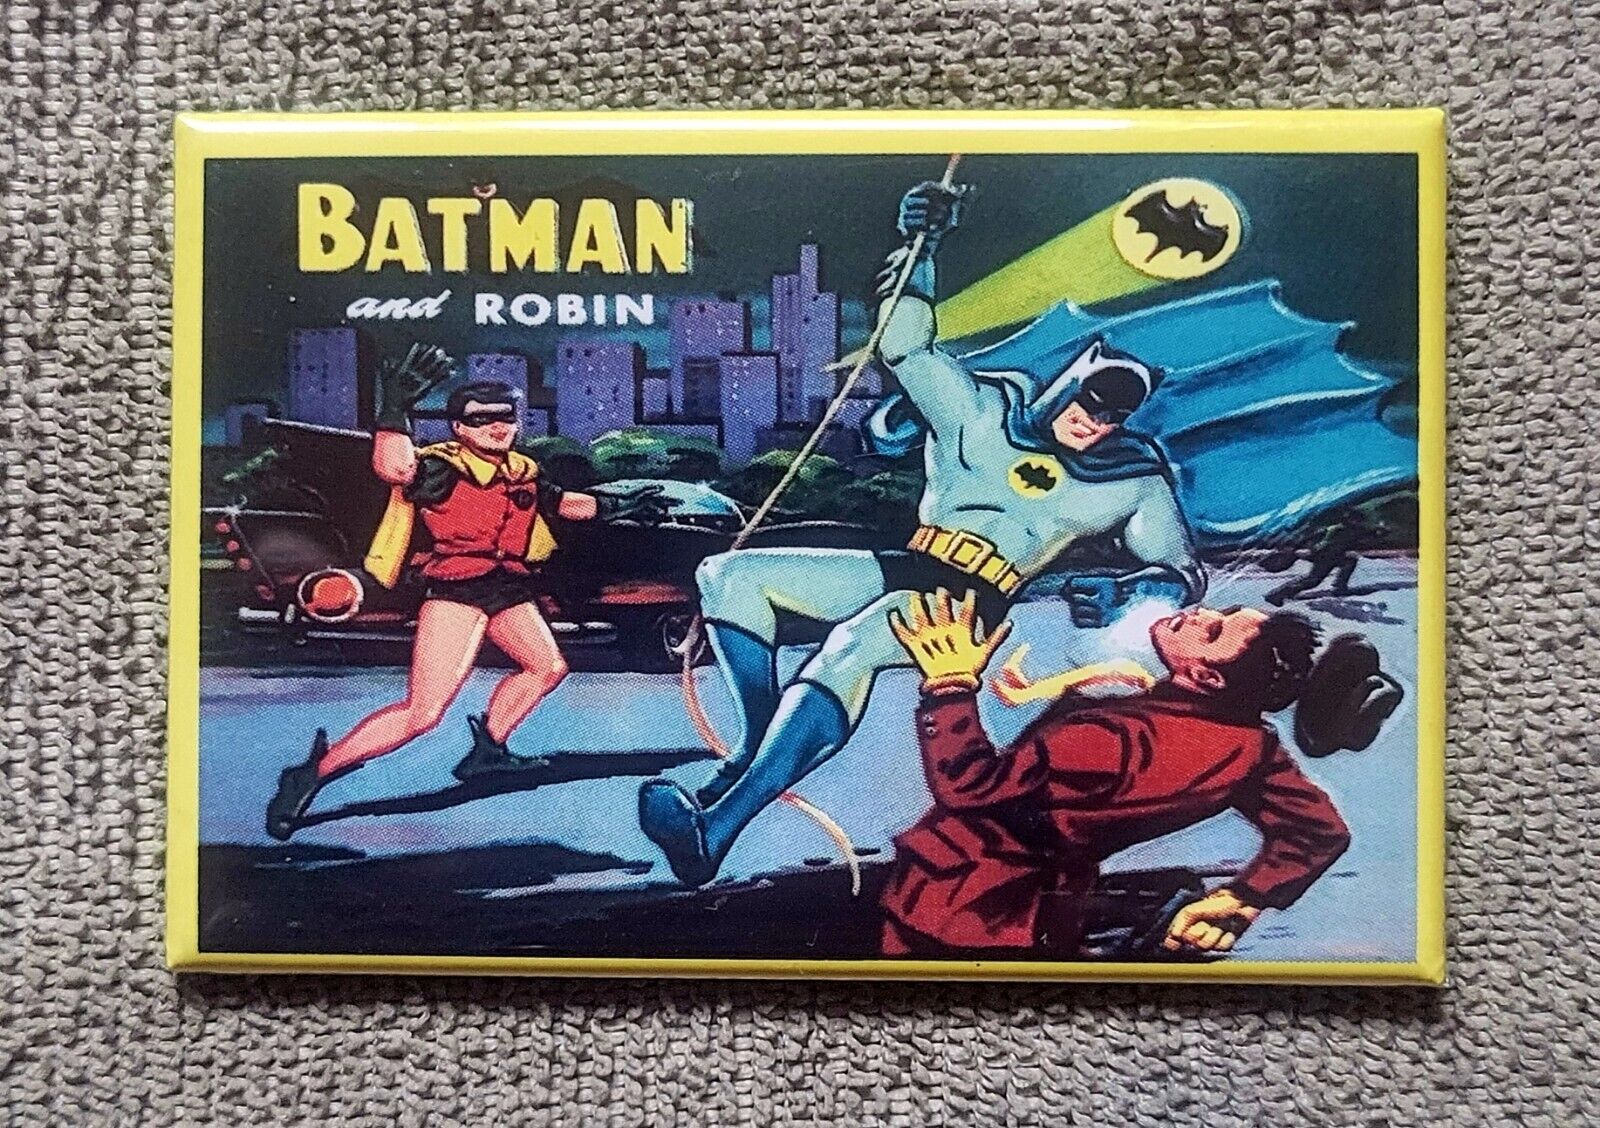 Batman and Robin Fight Bad Guy Refrigerator Magnet Metal Collect 